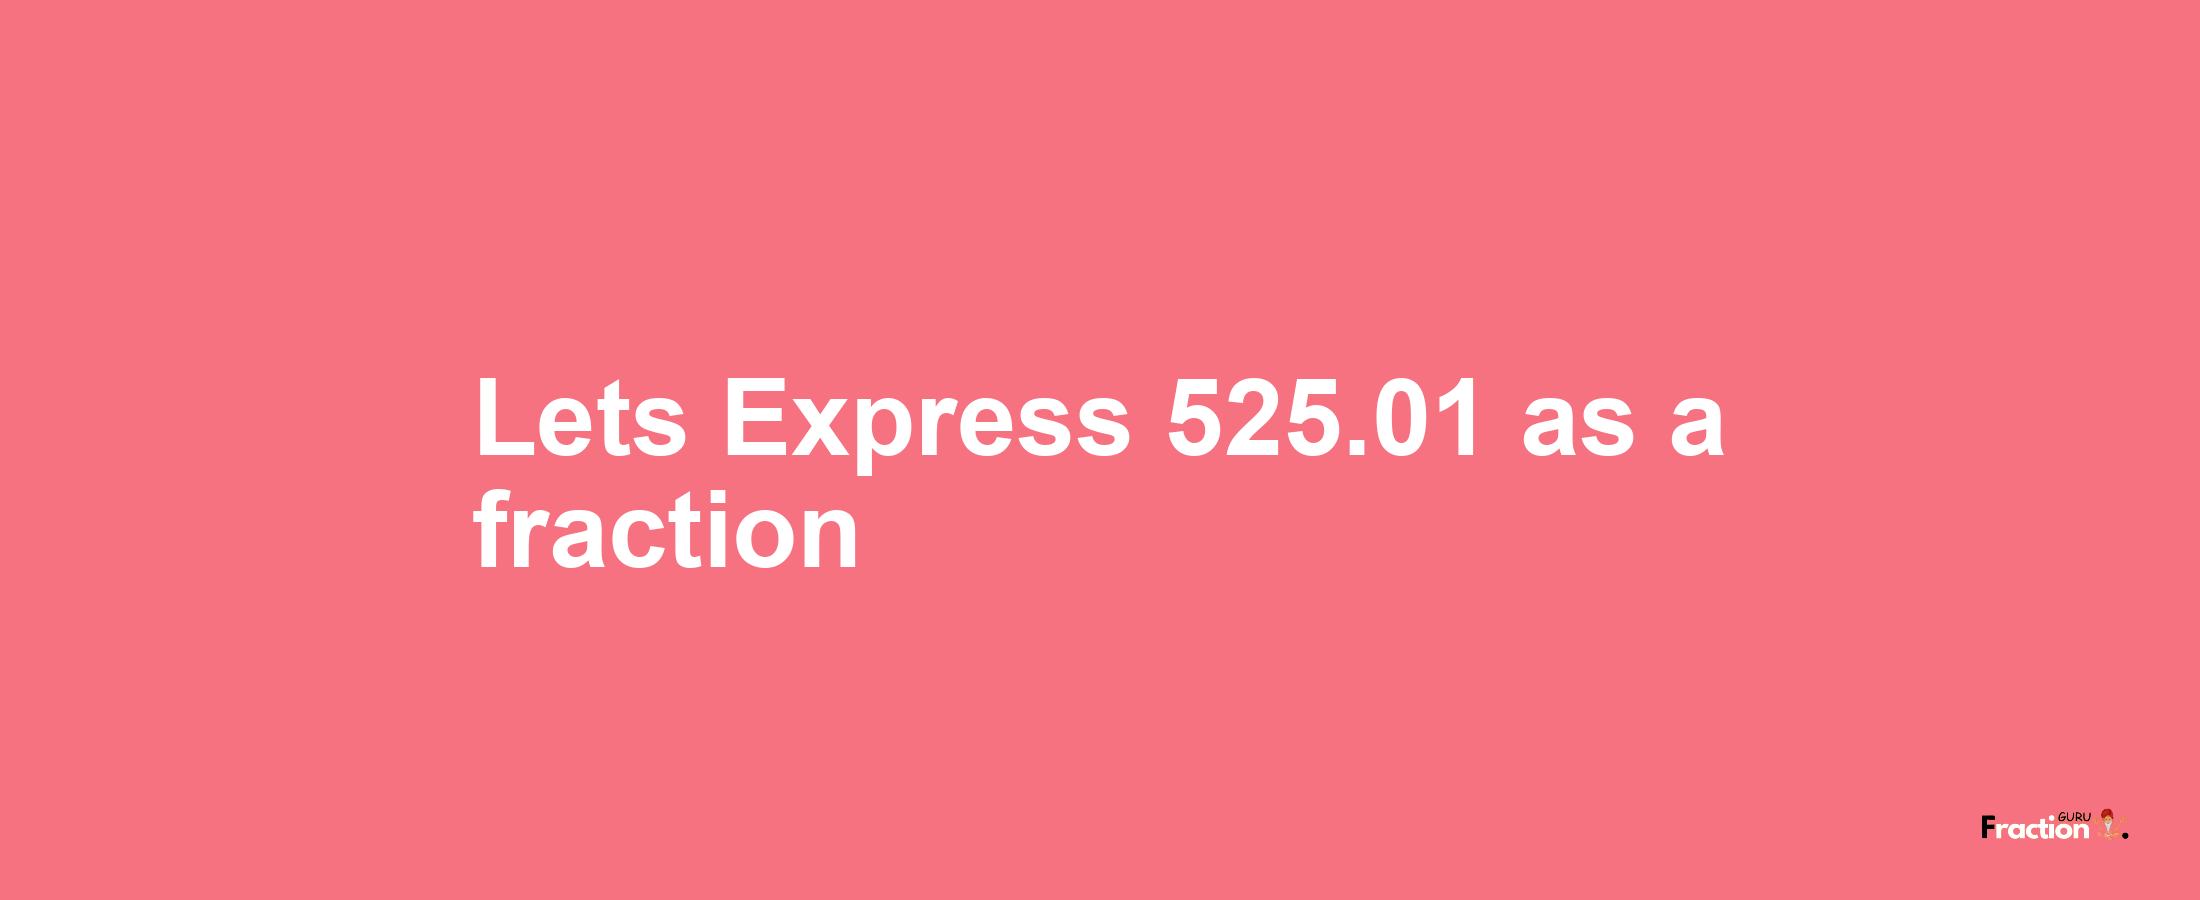 Lets Express 525.01 as afraction